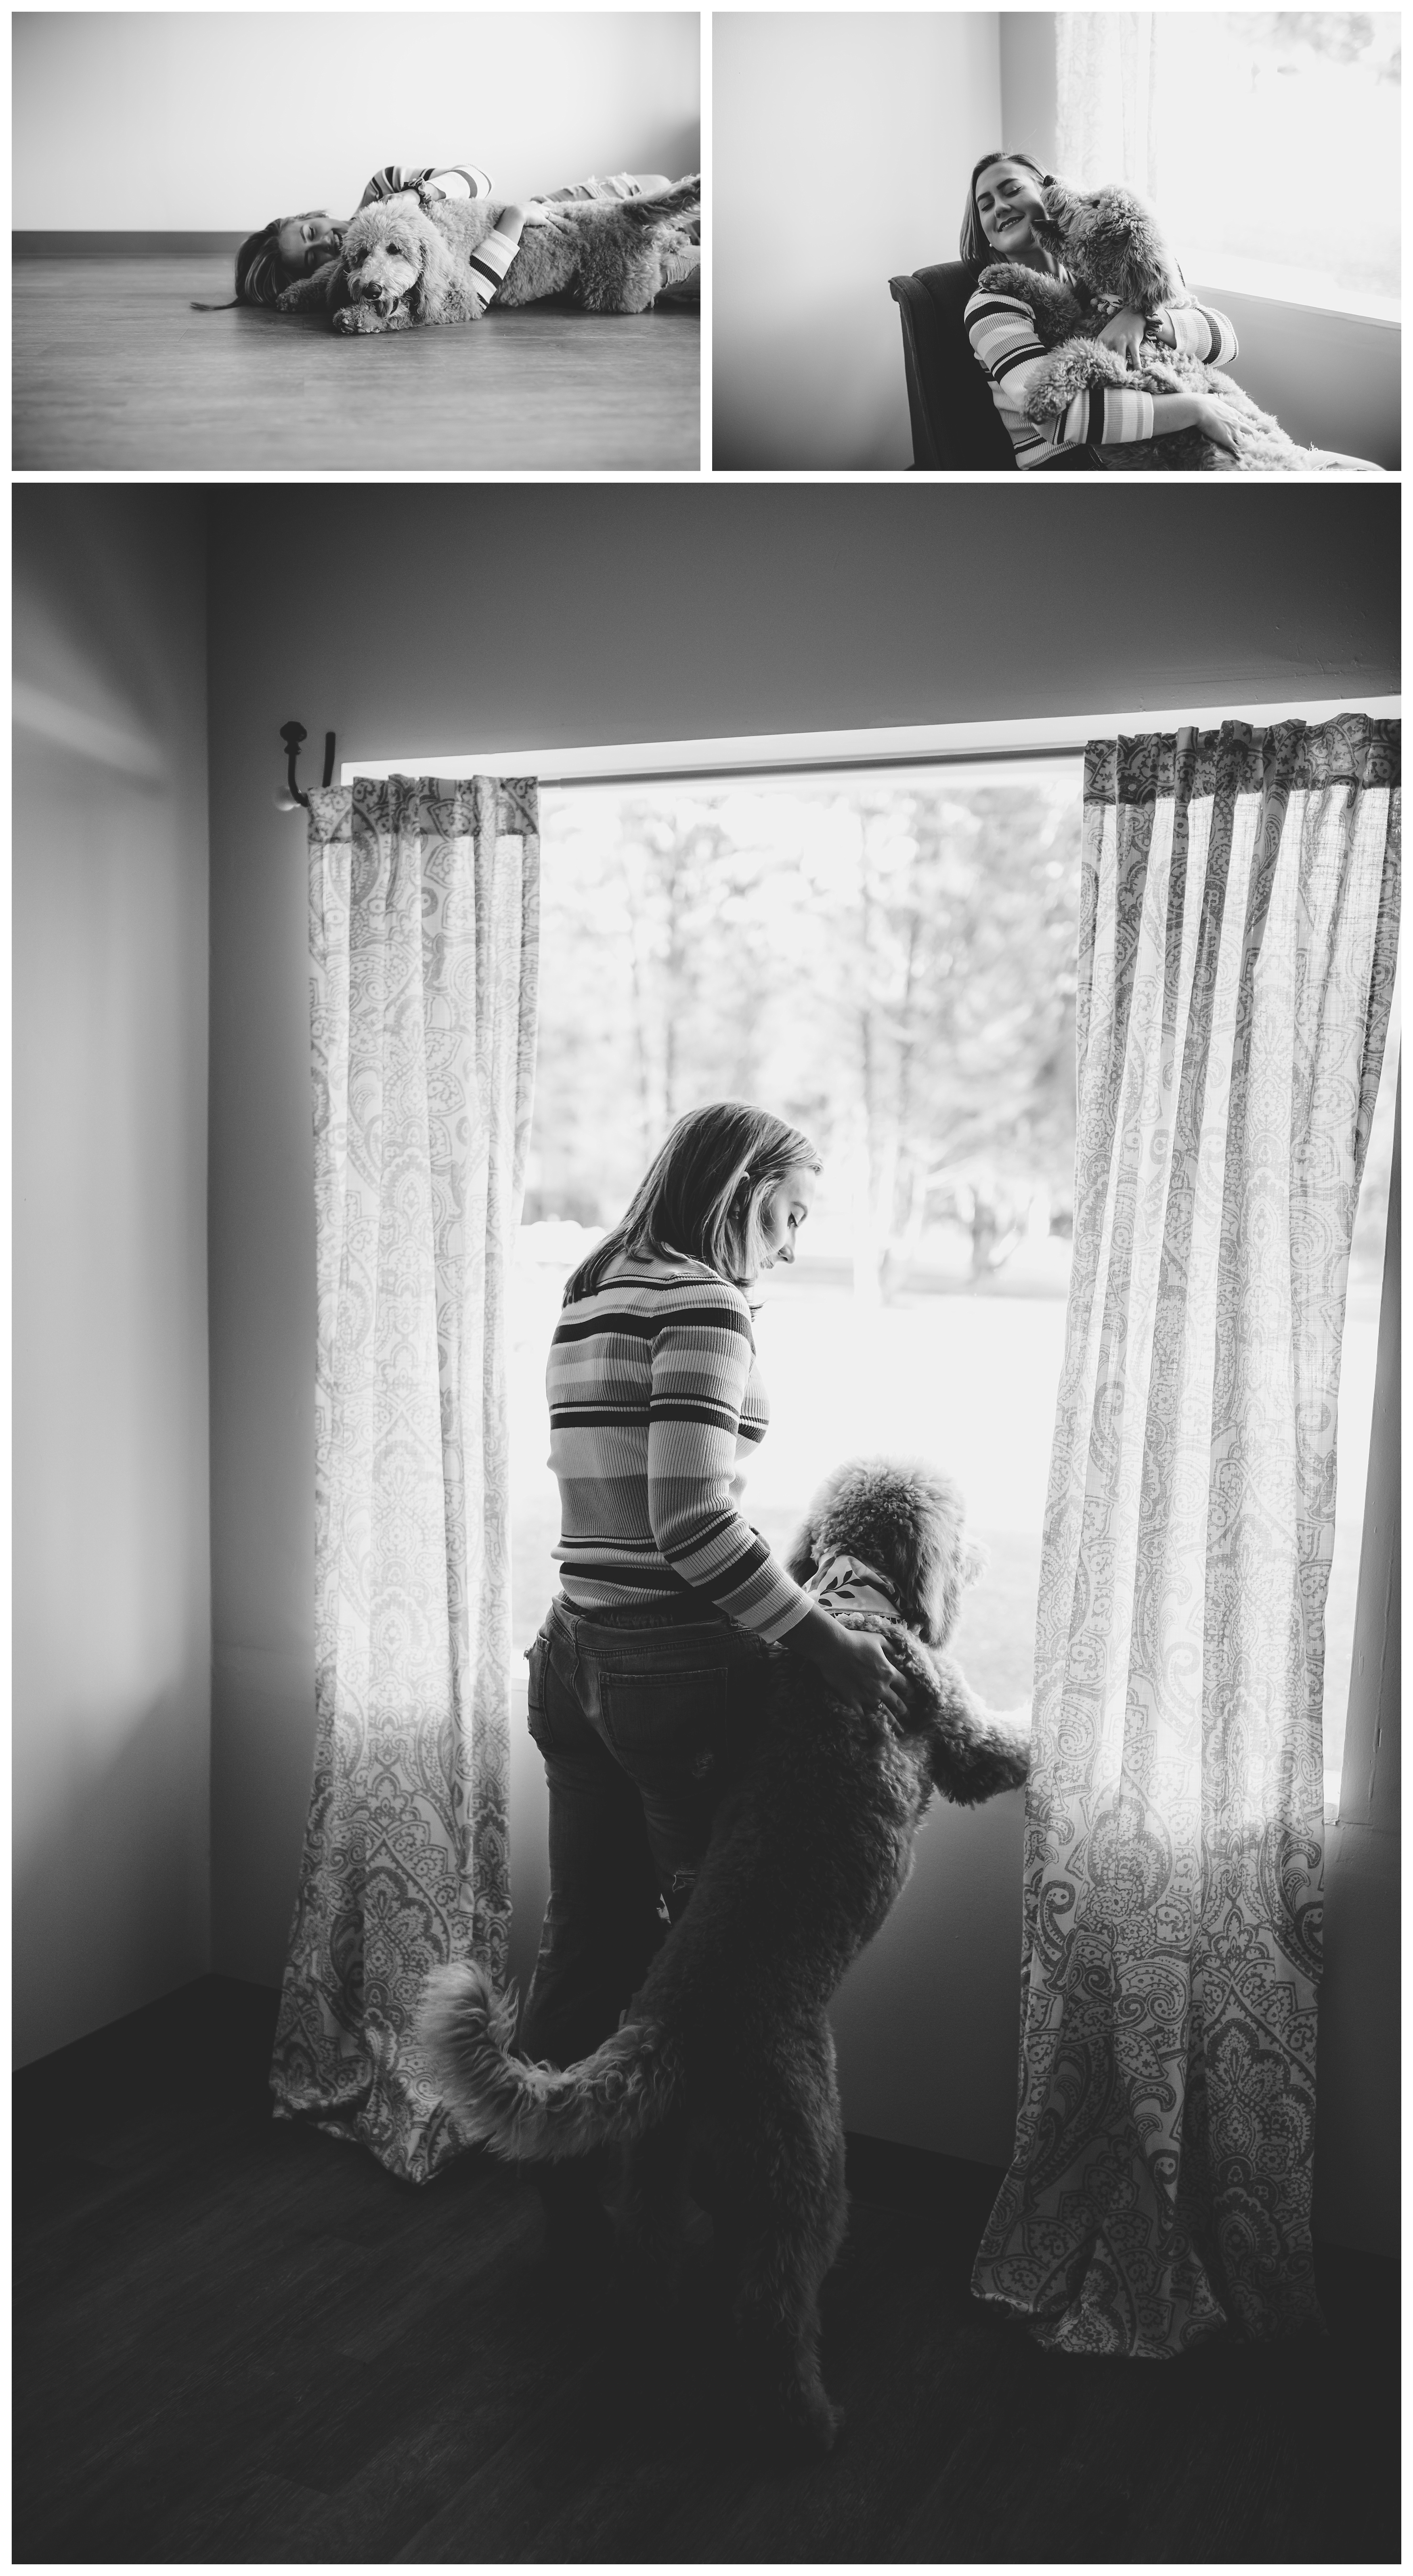 Intimate pet photography capturing the bond between mom and pup. Shelly Williams Photography